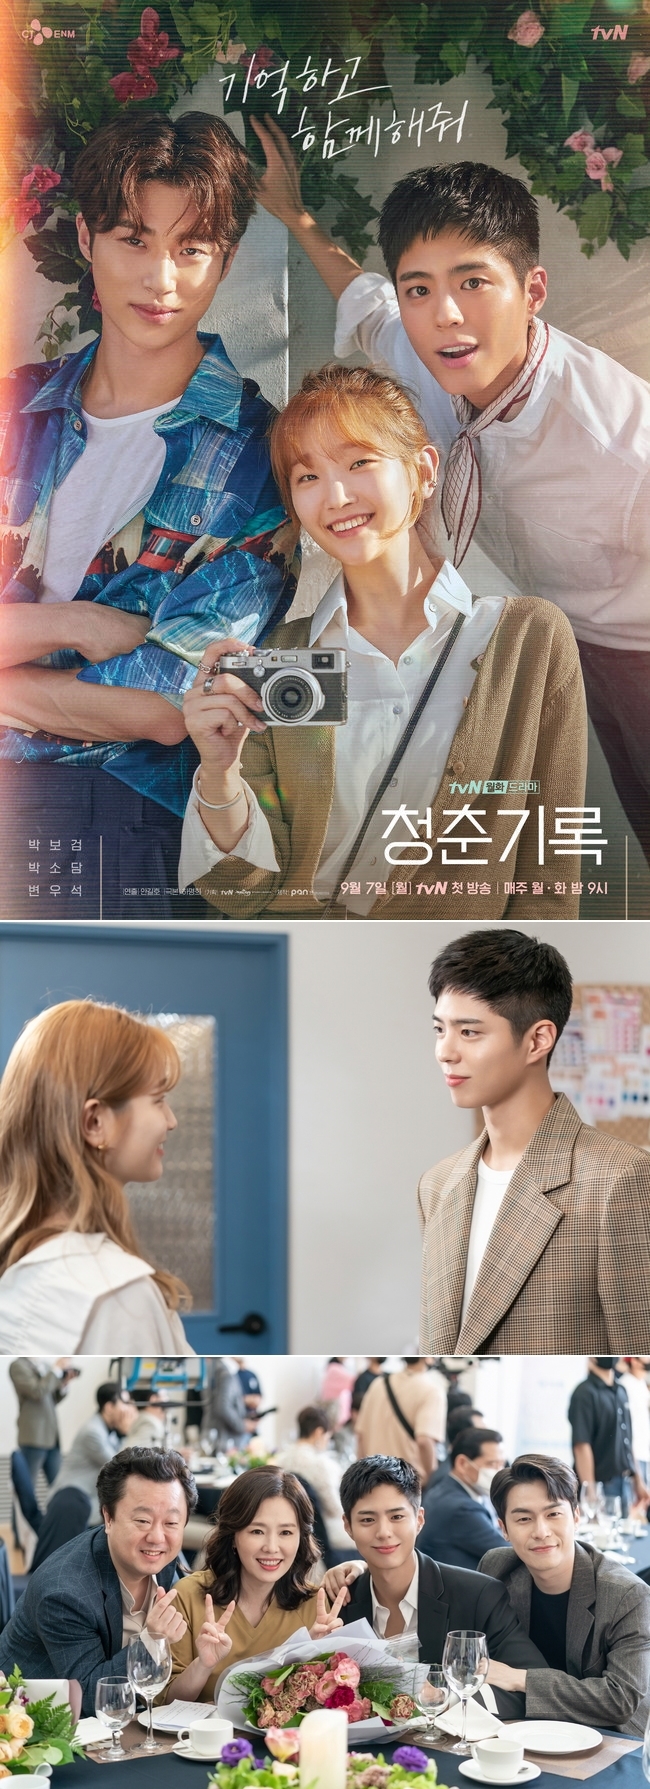 It is hard to imagine Sa Hye-joon, not Actor Park Bo-gum.Park Bo-gum played the role of A Meritorious Retainer in TVN drama Record of Youth.Record of Youth, which ends on October 27, deals with the growth of youths who are trying to achieve their dreams and love without despairing on the wall of reality.Since its first broadcast on September 7, it has cruised without missing the first place in the same time zone.The ratings, which started with 6.3% (based on the nationwide Nielsen Korea pay-per-view platform), rose to 8.2%, maintaining stable figures throughout the airing.According to Good Data Corporation, a TV topic analysis agency, Record of Youth ranked first in the drama topic for two consecutive weeks as of October 20.In particular, Park Bo-gum was ranked # 1 for the seventh consecutive week until October 3 after reaching the top of the drama cast in the first week of September.Among them, the main character Park Bo-gum was prominent inside and outside the drama.Park Bo-gum, who is serving as Navy on August 31, is said to have done his best to Record of Youth, which was the last film before enlistment.Sa Hye-joon, who he played, overcomes various trials and grows from model to top actor.Park Bo-gum, who started his career as an actor, is the back door that he practiced in a while by referring to various materials such as fashion show runway video, picture, interview before shooting in order to show awkwardness as a model.The role of the field atmosphere maker was also up to Park Bo-gum; the pre-production, planned Record of Youth shoot, was completed on August 23.However, the relationship between Actors continues: Actors communication continues with the opening of a group Kakao Talk chat room by Park Bo-gum.Actor Lee Jae-won, who played as Sa Hye-joons brother, Sa Kyung-joon, recently said in an interview with the company, Although it was a pre-production drama, the prosecutor has been communicating since he created a group kakao chat room.As with all the Dramas, by the time I was shooting 13 to 14, I felt really comfortable, like a family, and I wanted to shoot up to 30 copies, not 16.Actors were very happy to talk with each other. At the end of the shooting, I was really busy, but the assistant presented the handwritten letter to the actors.A Drama official said, Park Bo-gum played a role in raising the atmosphere on the set.Although the main character was relatively large and the shooting schedule was tight ahead of the enlistment, the atmosphere was always good, not only for fellow actors but also for other actors agency officials and staffs in the field.I would have been tired, but I gave a greeting to the staff first. I also tried to get a cameo. I asked Hyeri, who appeared on TVN Respond 1988 in 2015, to make a special appearance and make a casting.Hyeri said, Park Bo-gum is not a god who appears, but I was very grateful and grateful for paying close attention to busy schedules such as visiting the scene and giving me a snack or snack.Even after enlistment, I was able to confirm the extraordinary passion of Park Bo-gum, which poured into Drama.Every Monday and Tuesday at 10:20 pm, the time of the end of the drama, he posted a photo of the Record of Youth Actors on his official SNS, a picture of the drama.Considering the situation that the Internet cannot be used after enlistment, it is known that it used the Twitter reservation function before enlistment, which reveals the responsibility for promoting the work and the affection for viewers and fans.Record of Youth ends with 16 episodes broadcast on the 27th.As I dreamed, I became a star who is loved by everyone, but I am curious about the ending of what kind of Choices I will do, facing the lonely reality that is difficult to keep my precious family, lovers and friends.The production team predicted that they would show the ending of Record of Youth. The production team said, There were always families around the youth.They will convey each others sincerity that they have not said, and will warmly decorate a page of Record of Youth. Sa Hye-joons firm determination to protect precious things and Choices will be full.